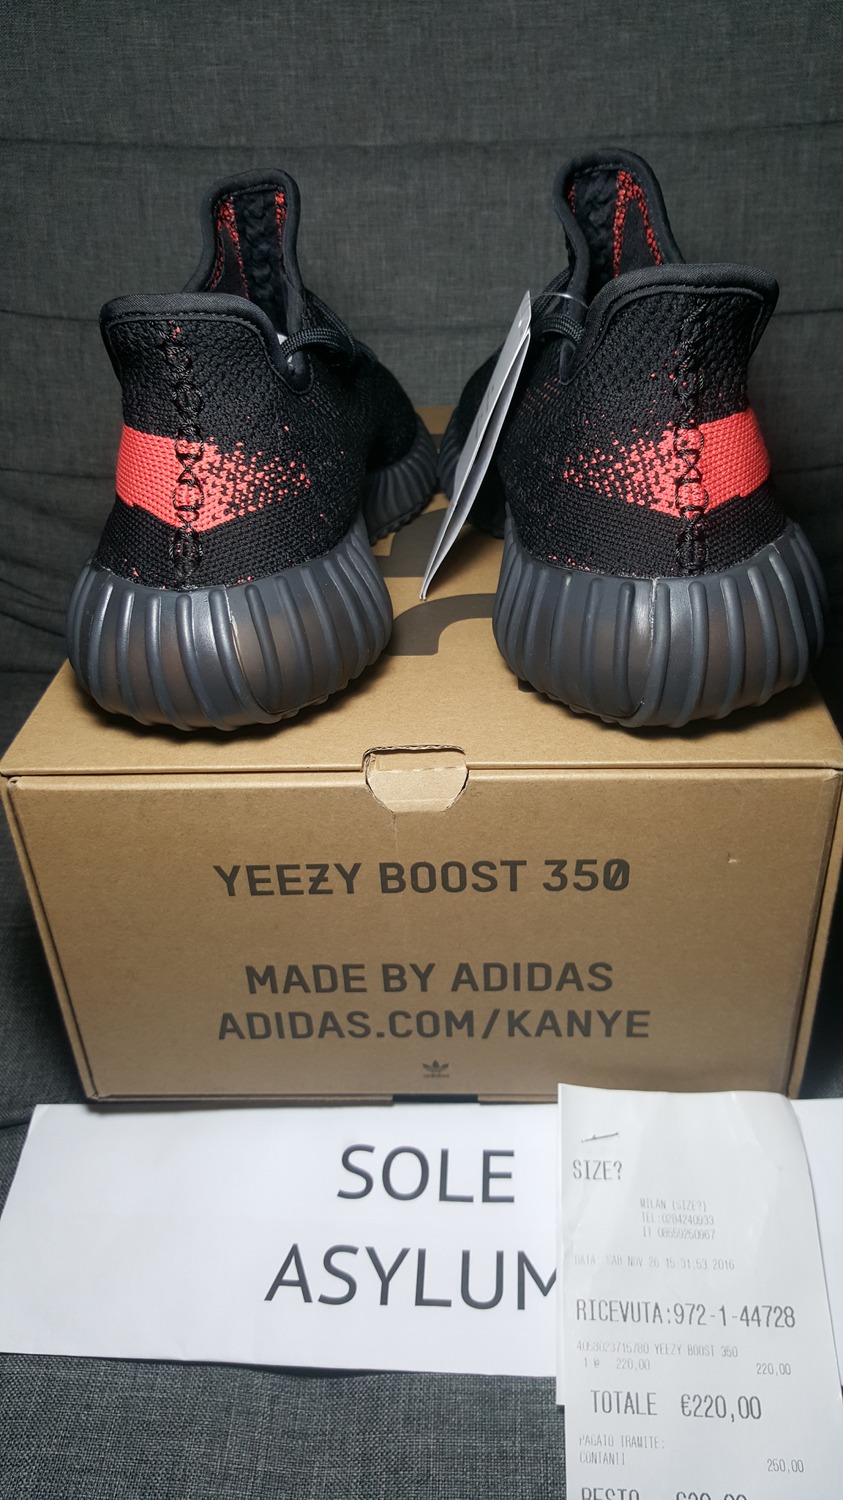 Authentic Adidas Yeezy 350 v2 Boost black and dark red